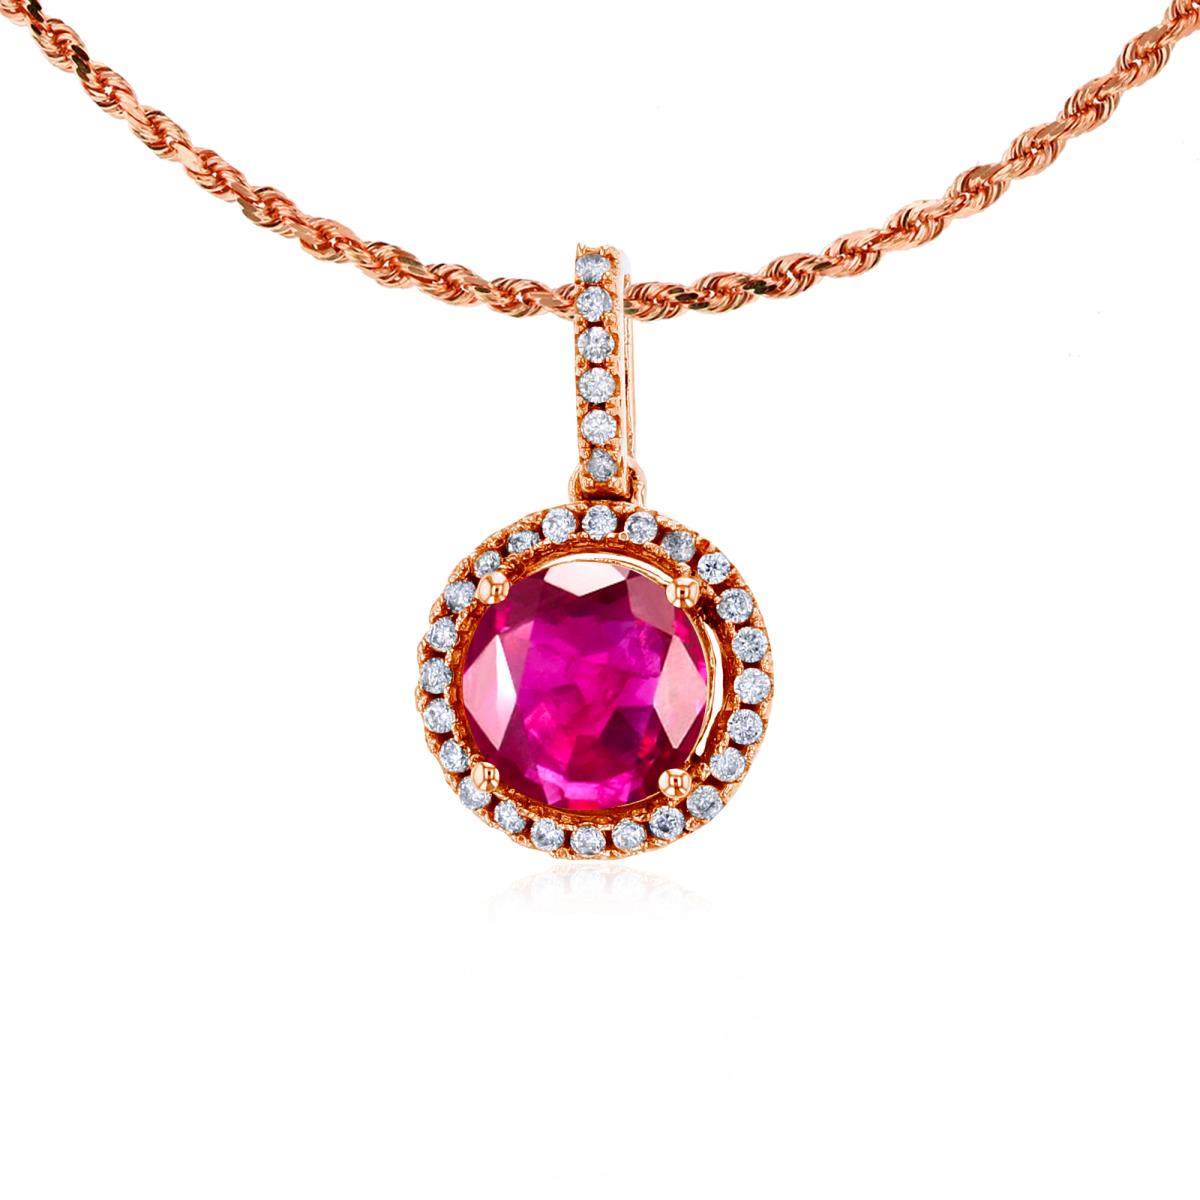 10K Rose Gold 7mm Round Glass Filled Ruby & 0.15 CTTW Round Diamonds Halo 18" Rope Chain Necklace